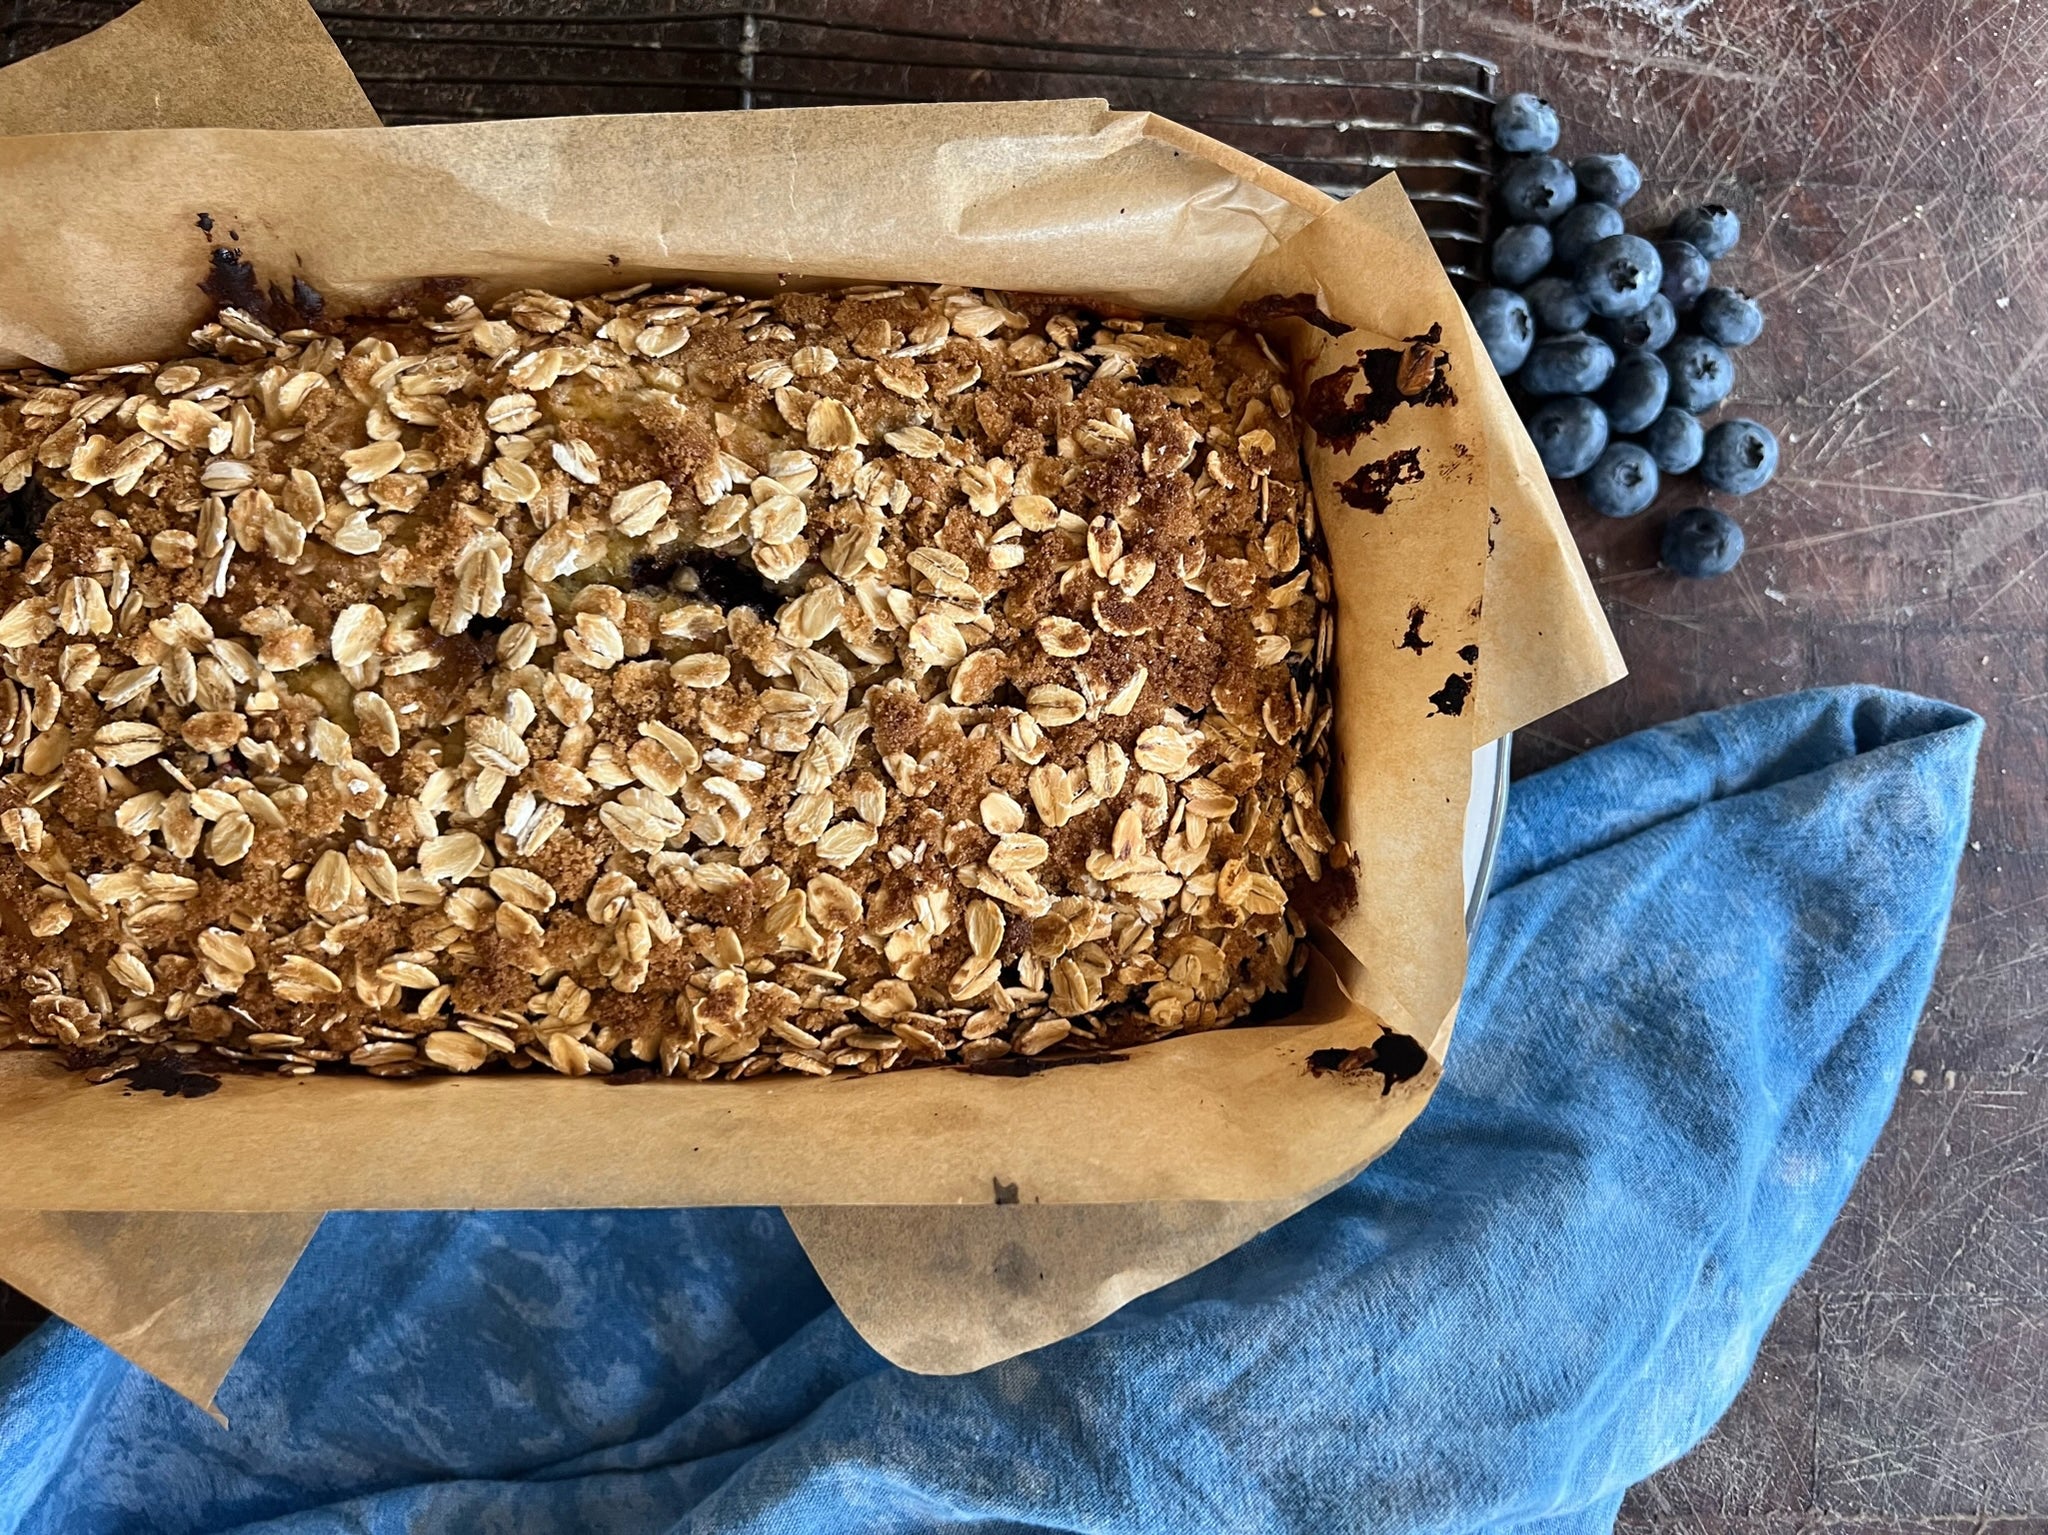 Blueberry Banana Bread Topped with an Oatmeal Crumble